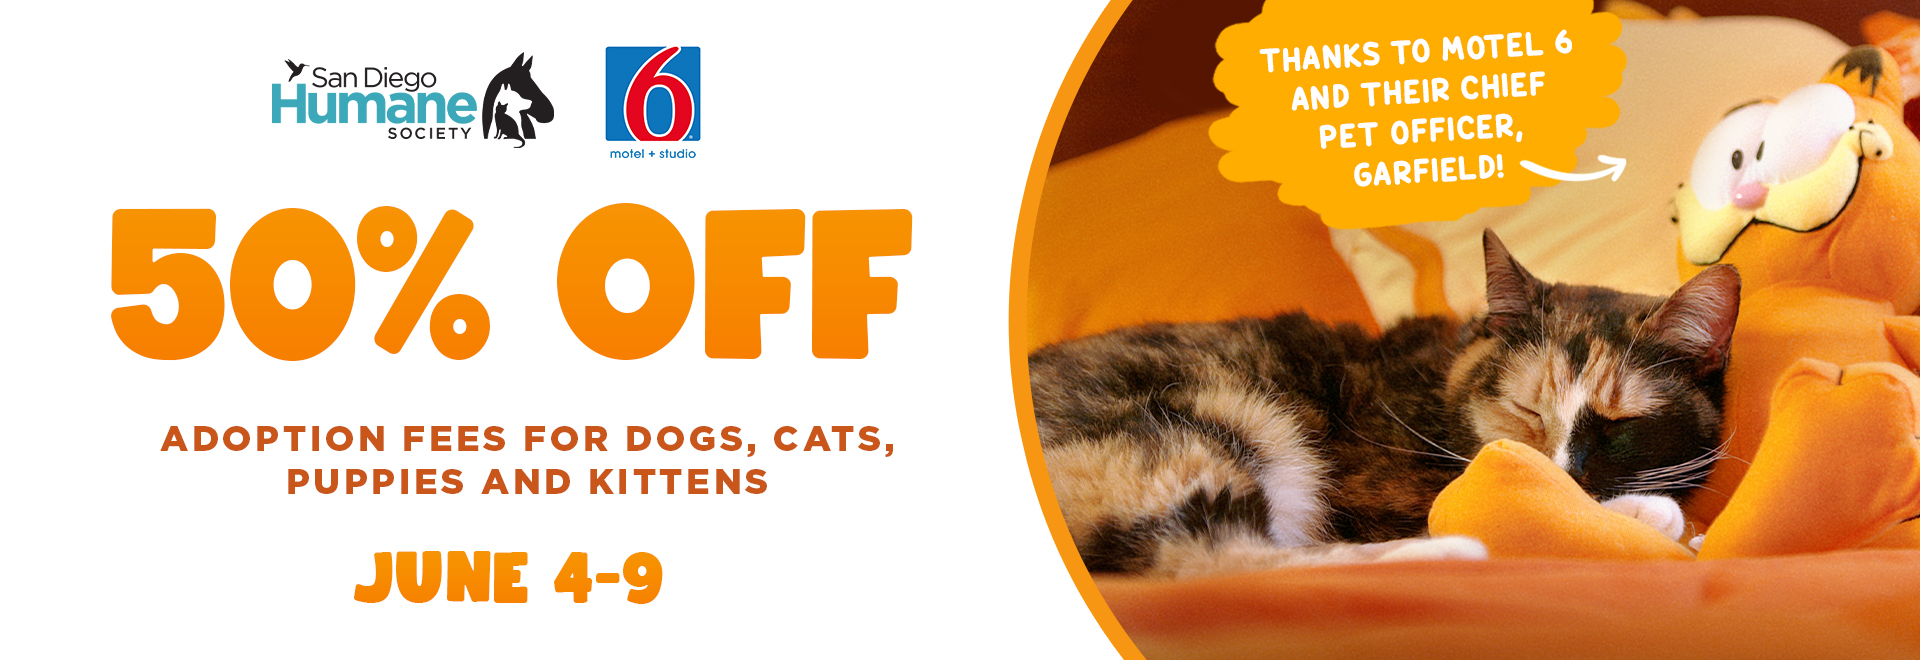 50% Off adoption fees for dogs, cats, puppies and kittens | June 4-9